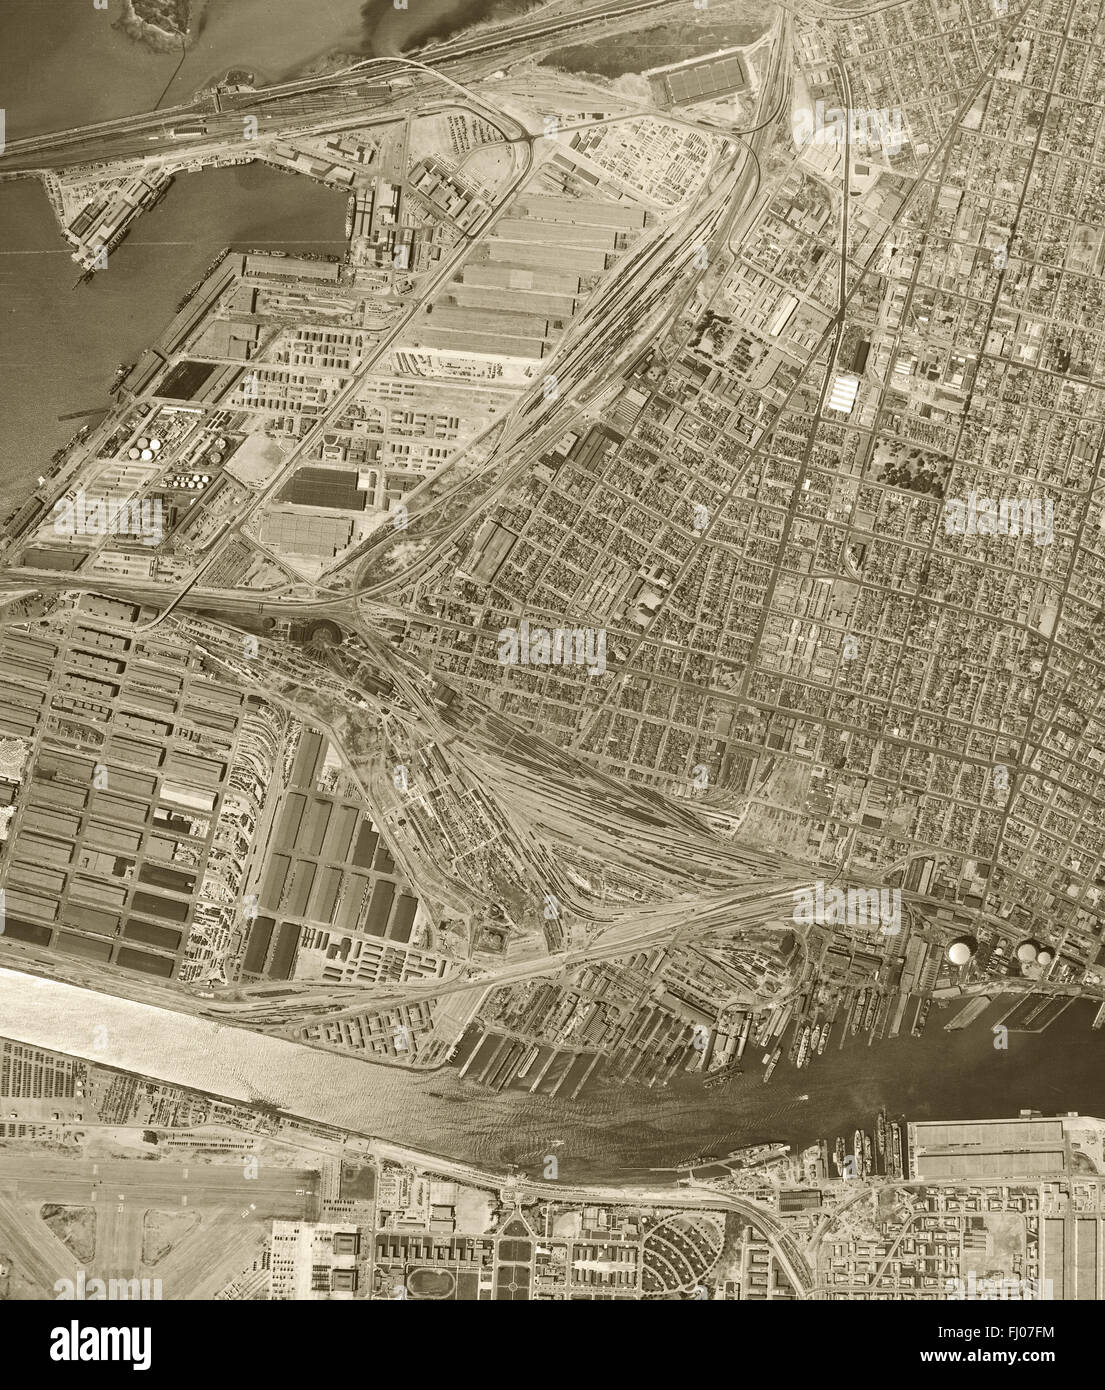 historical aerial photograph of the Port of Oakland, Oakland, California, 1946 Stock Photo